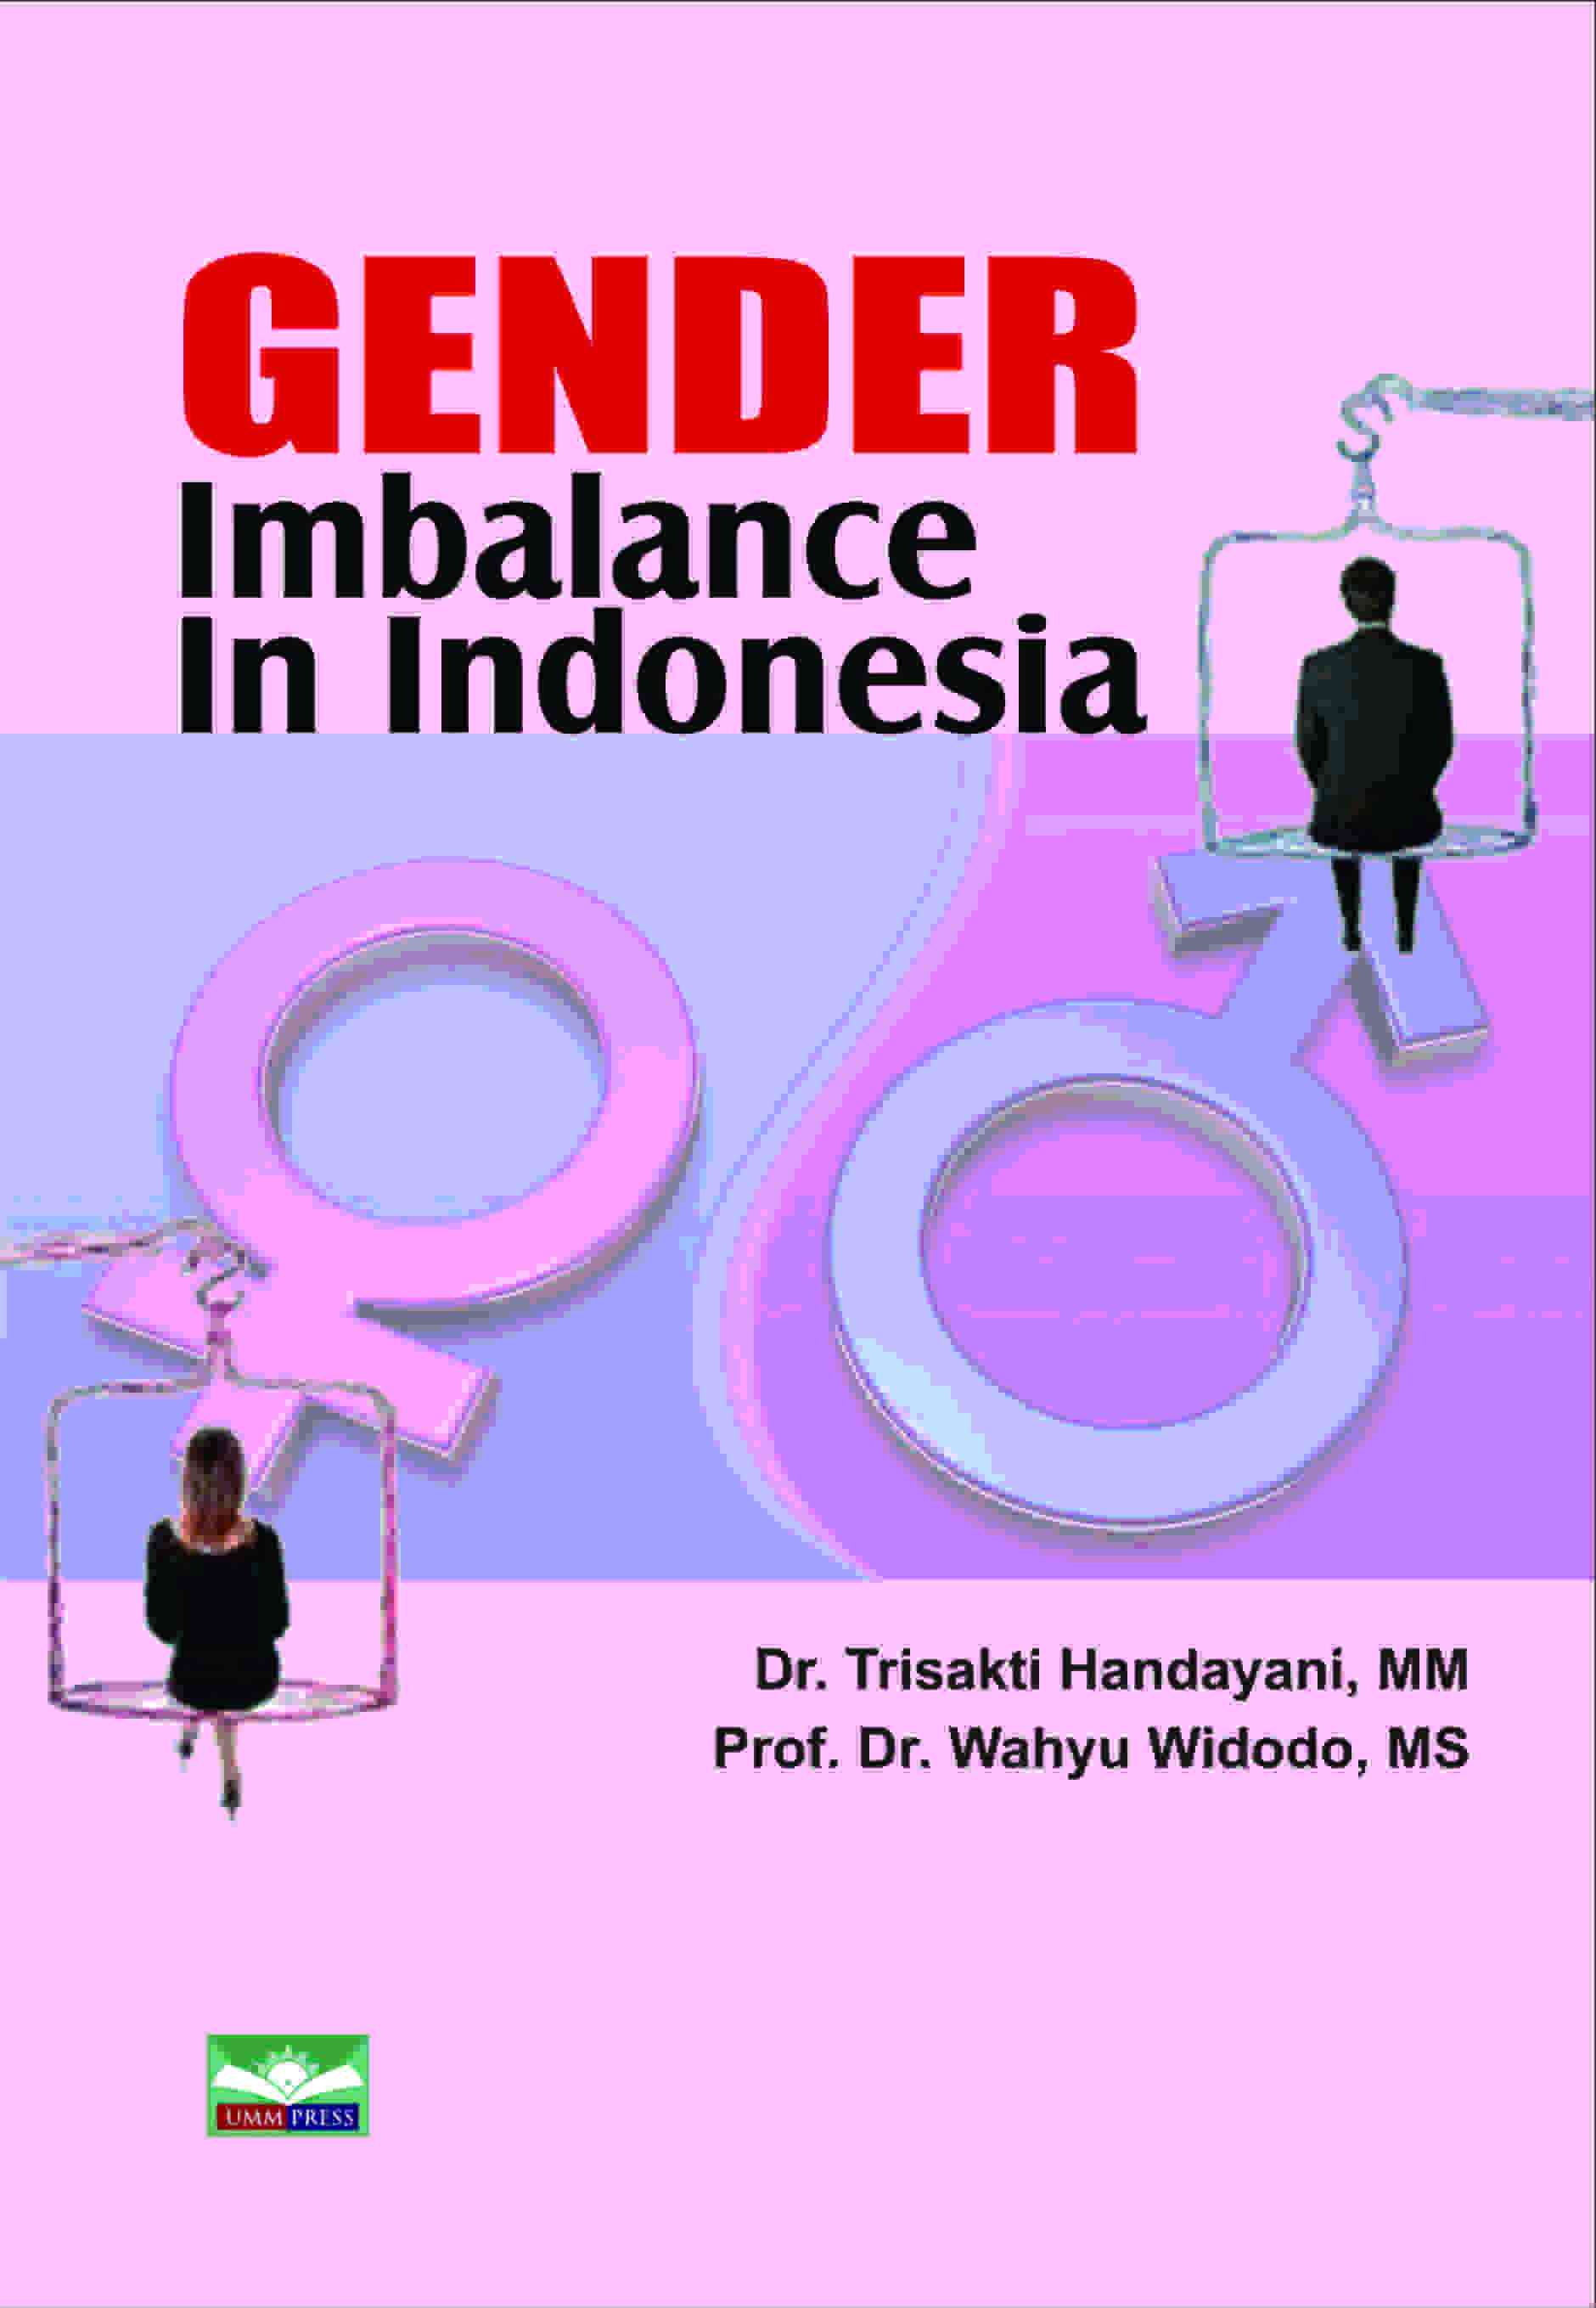 GENDER IMBALANCE IN INDONESIA